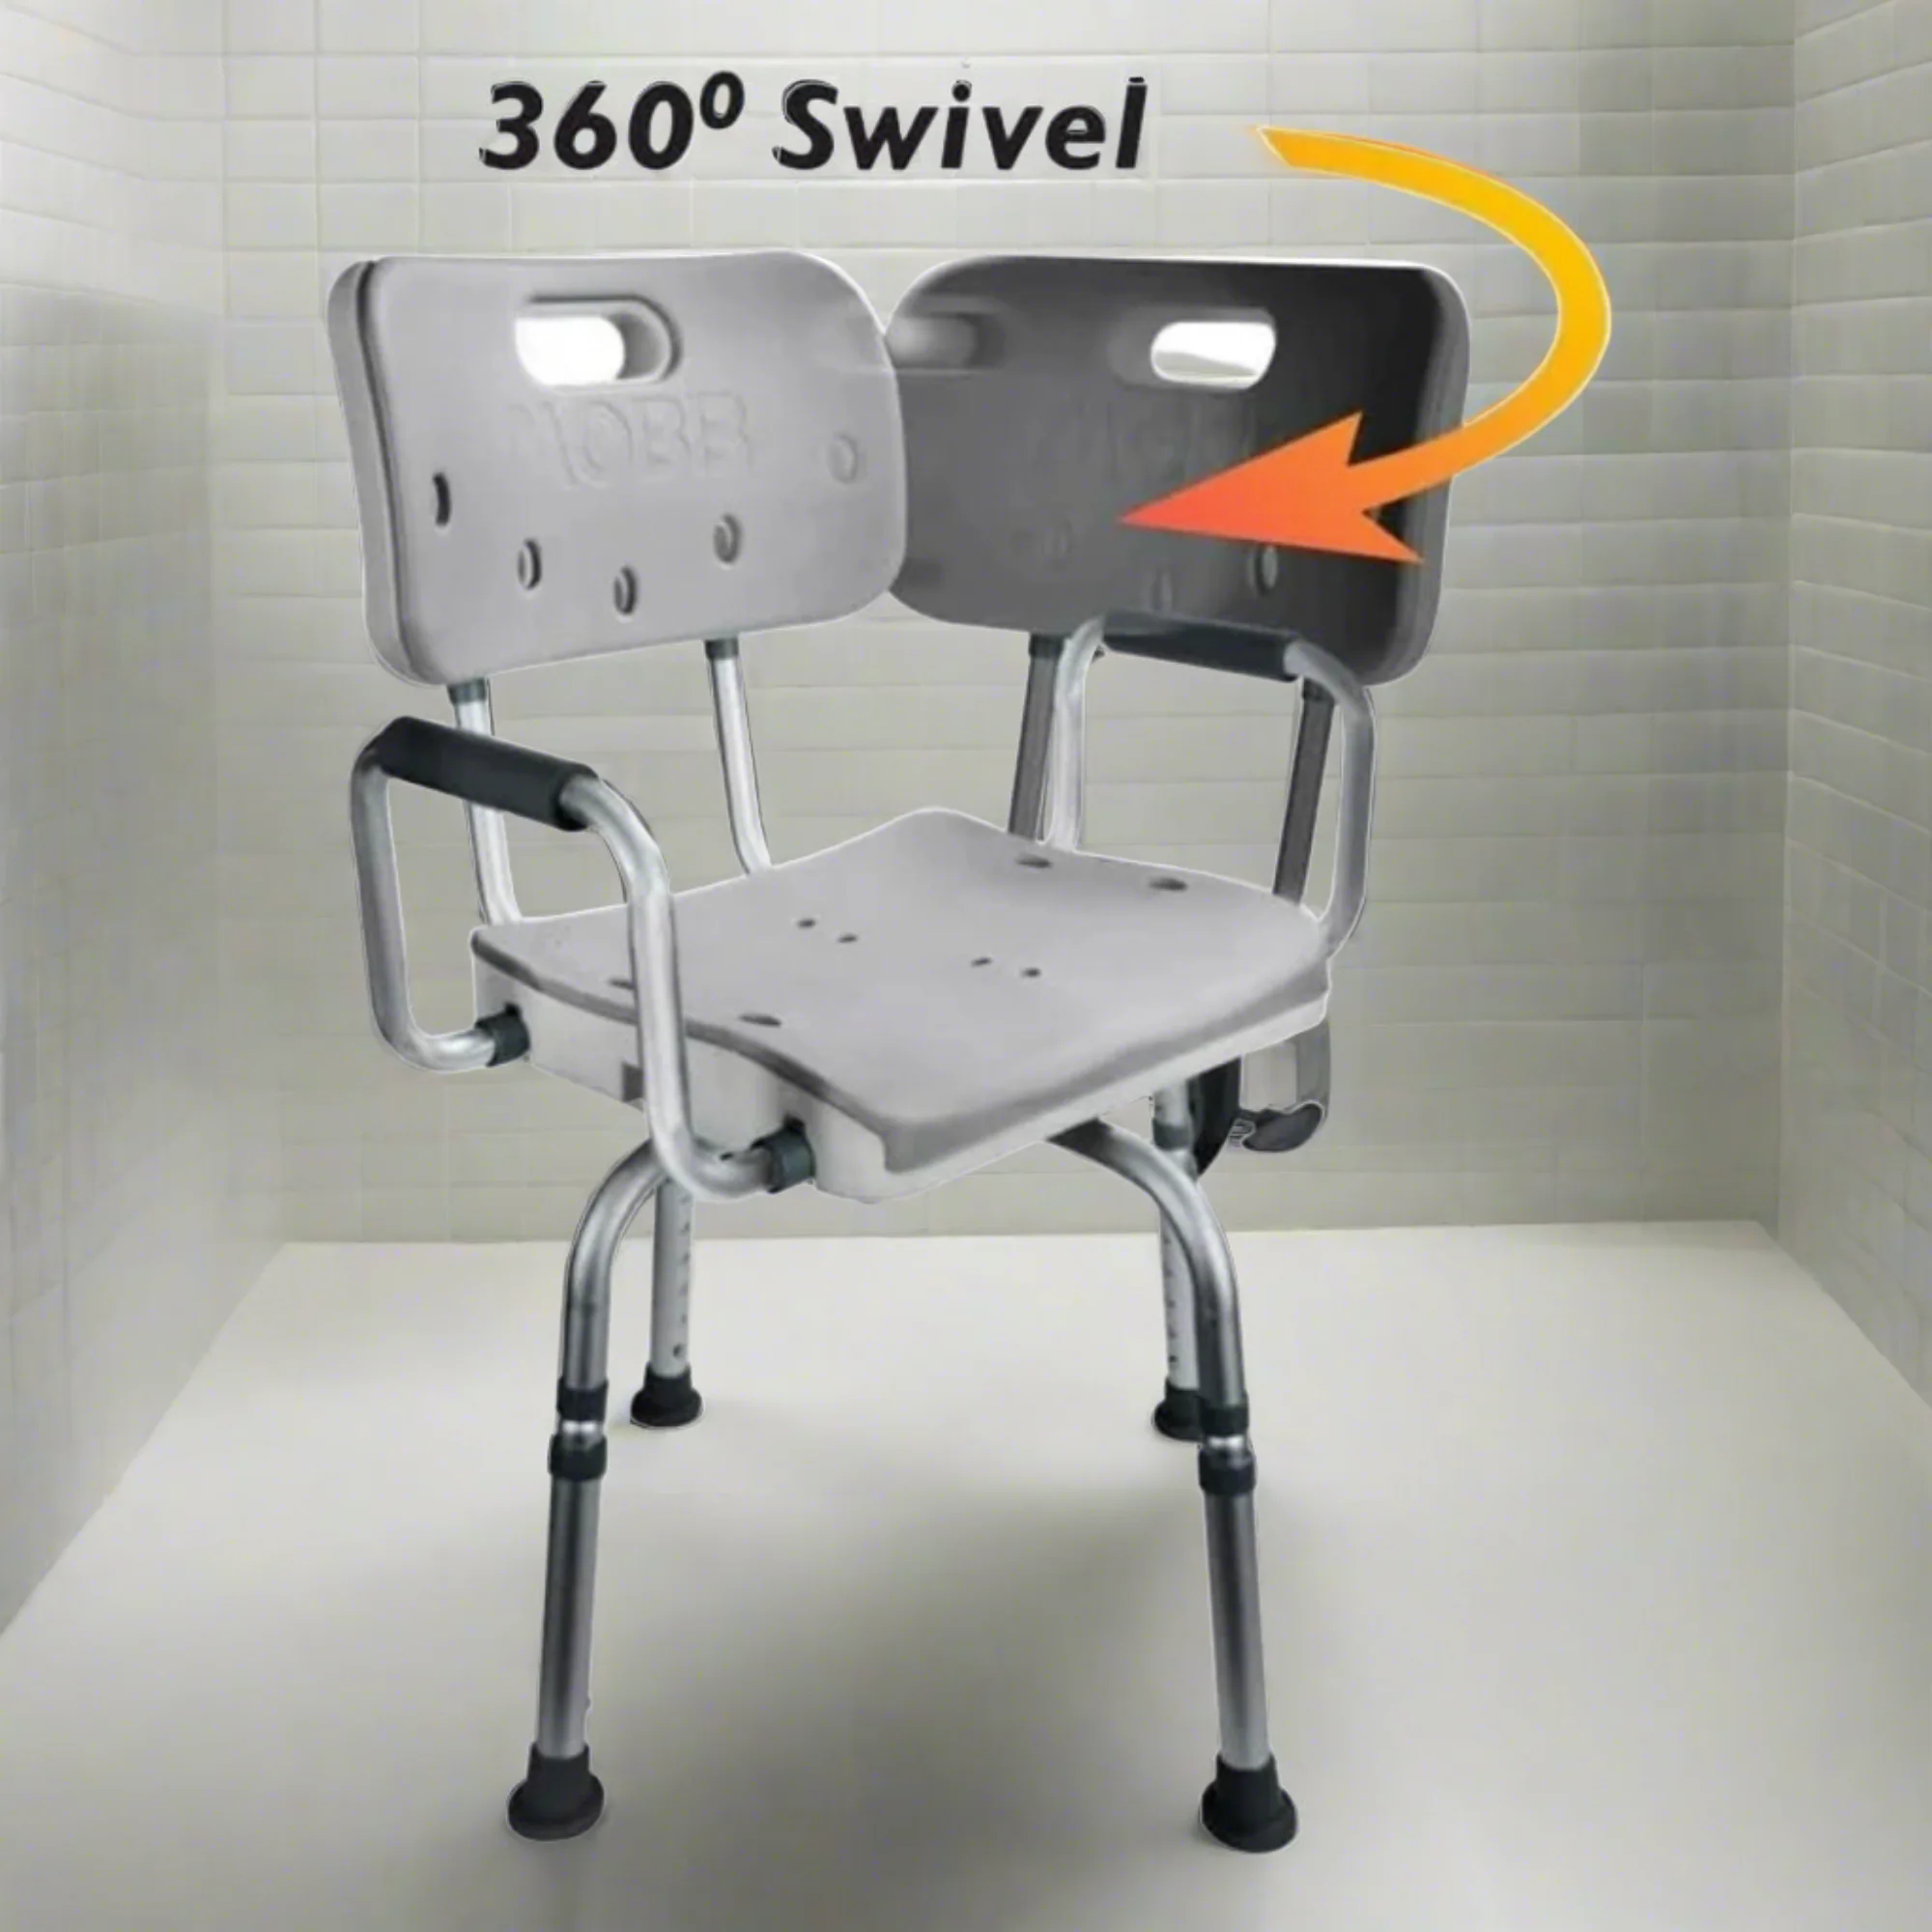 MOBB Swivel Shower Chair 3.0 - 360° Rotating Seat, Adjustable, 300 lbs Rustproof - Picture 5 of 12